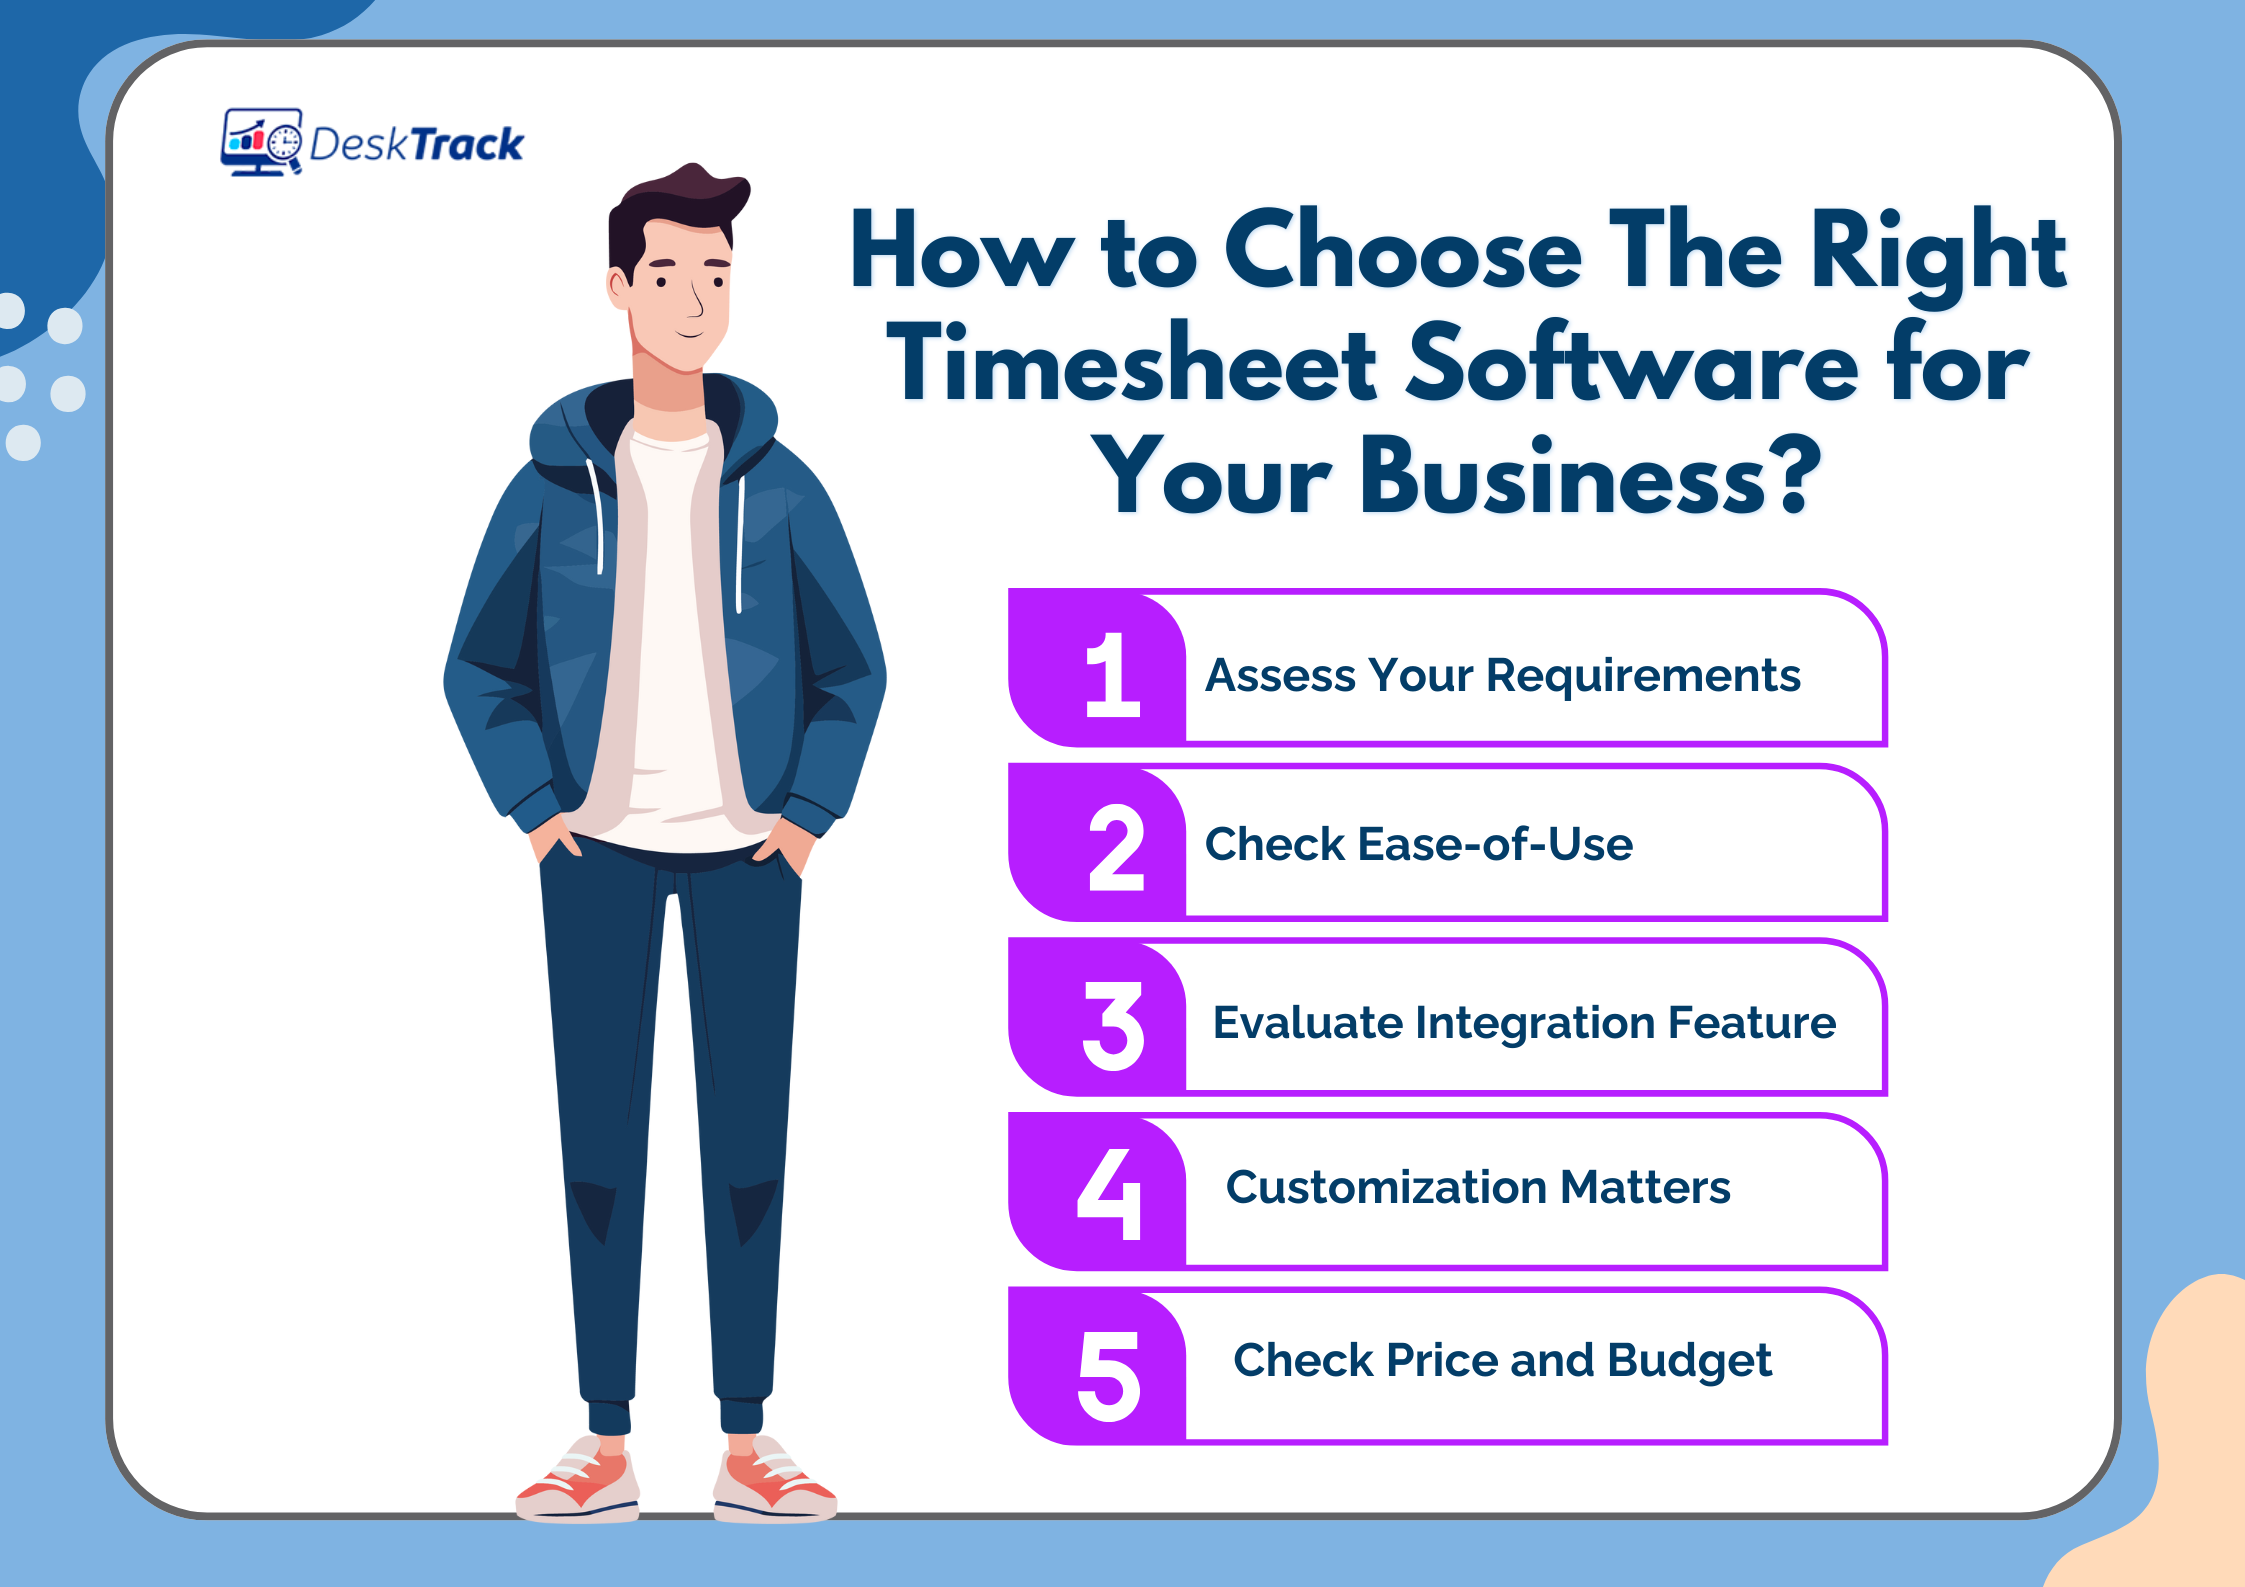 How to Choose The Right Timesheet Software for Your Business (1)